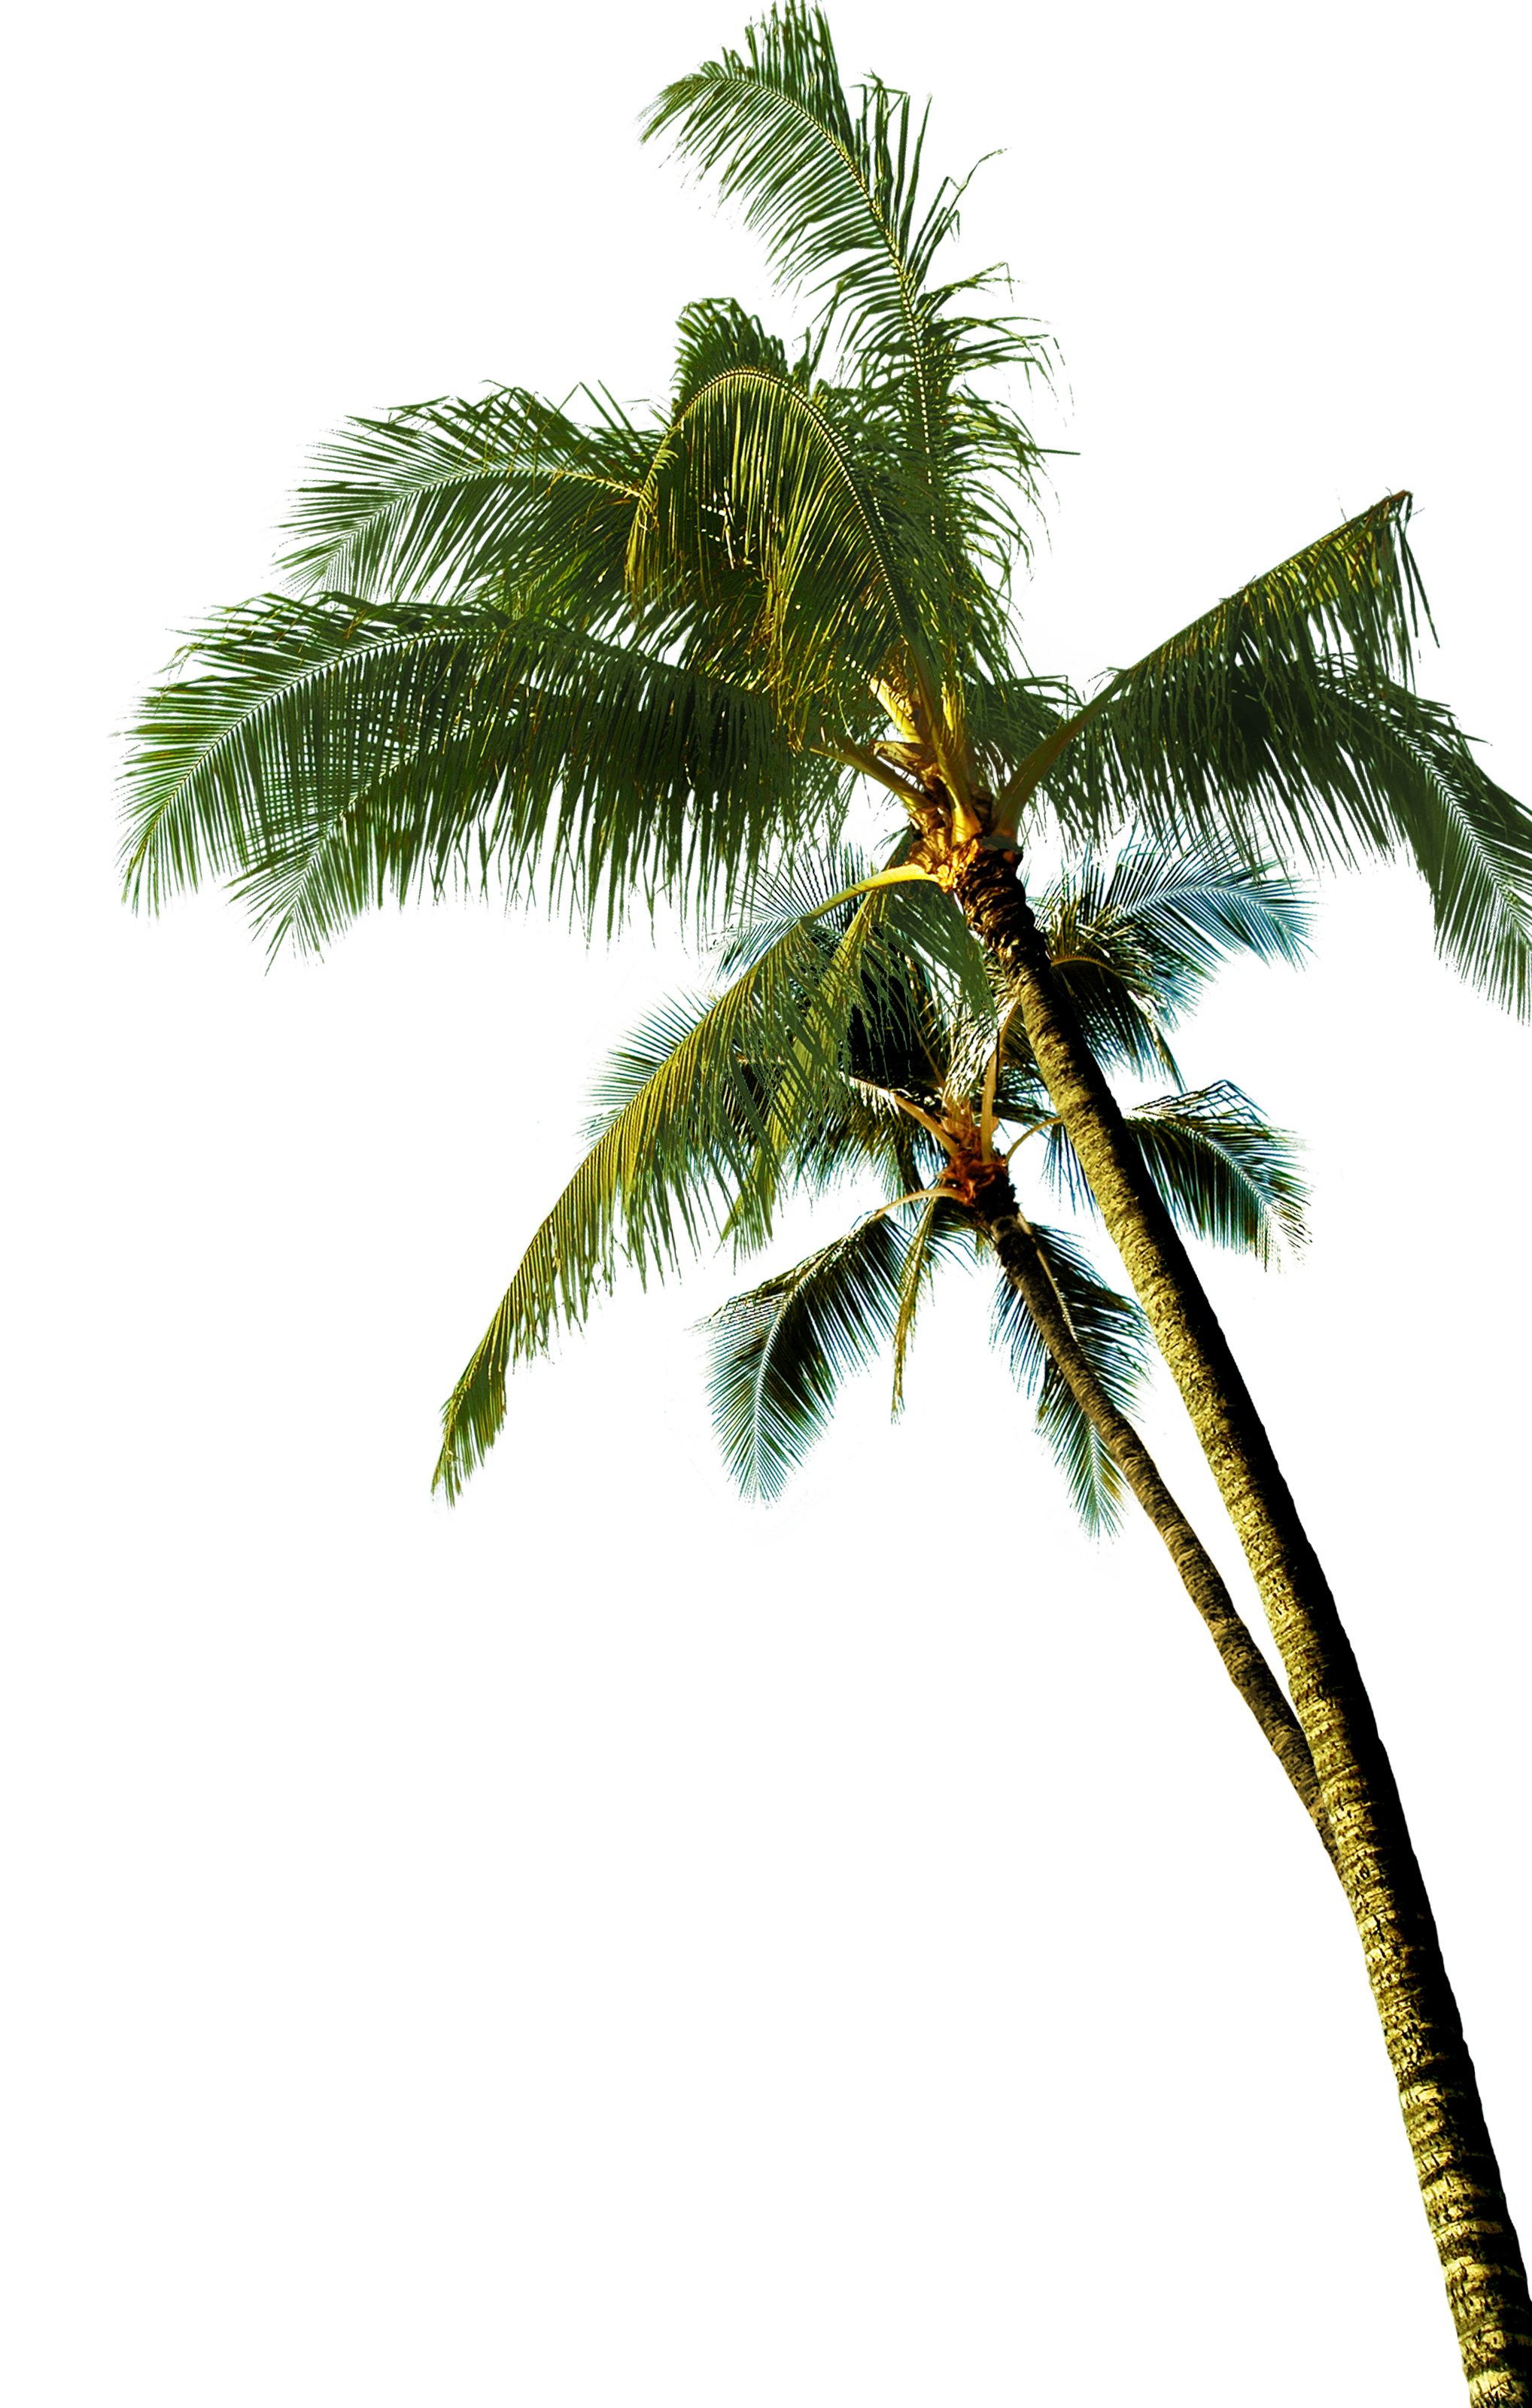 coconut-asian-palmyra-palm-tree-coconut-tree-png-download-2036-3200-free-transparent